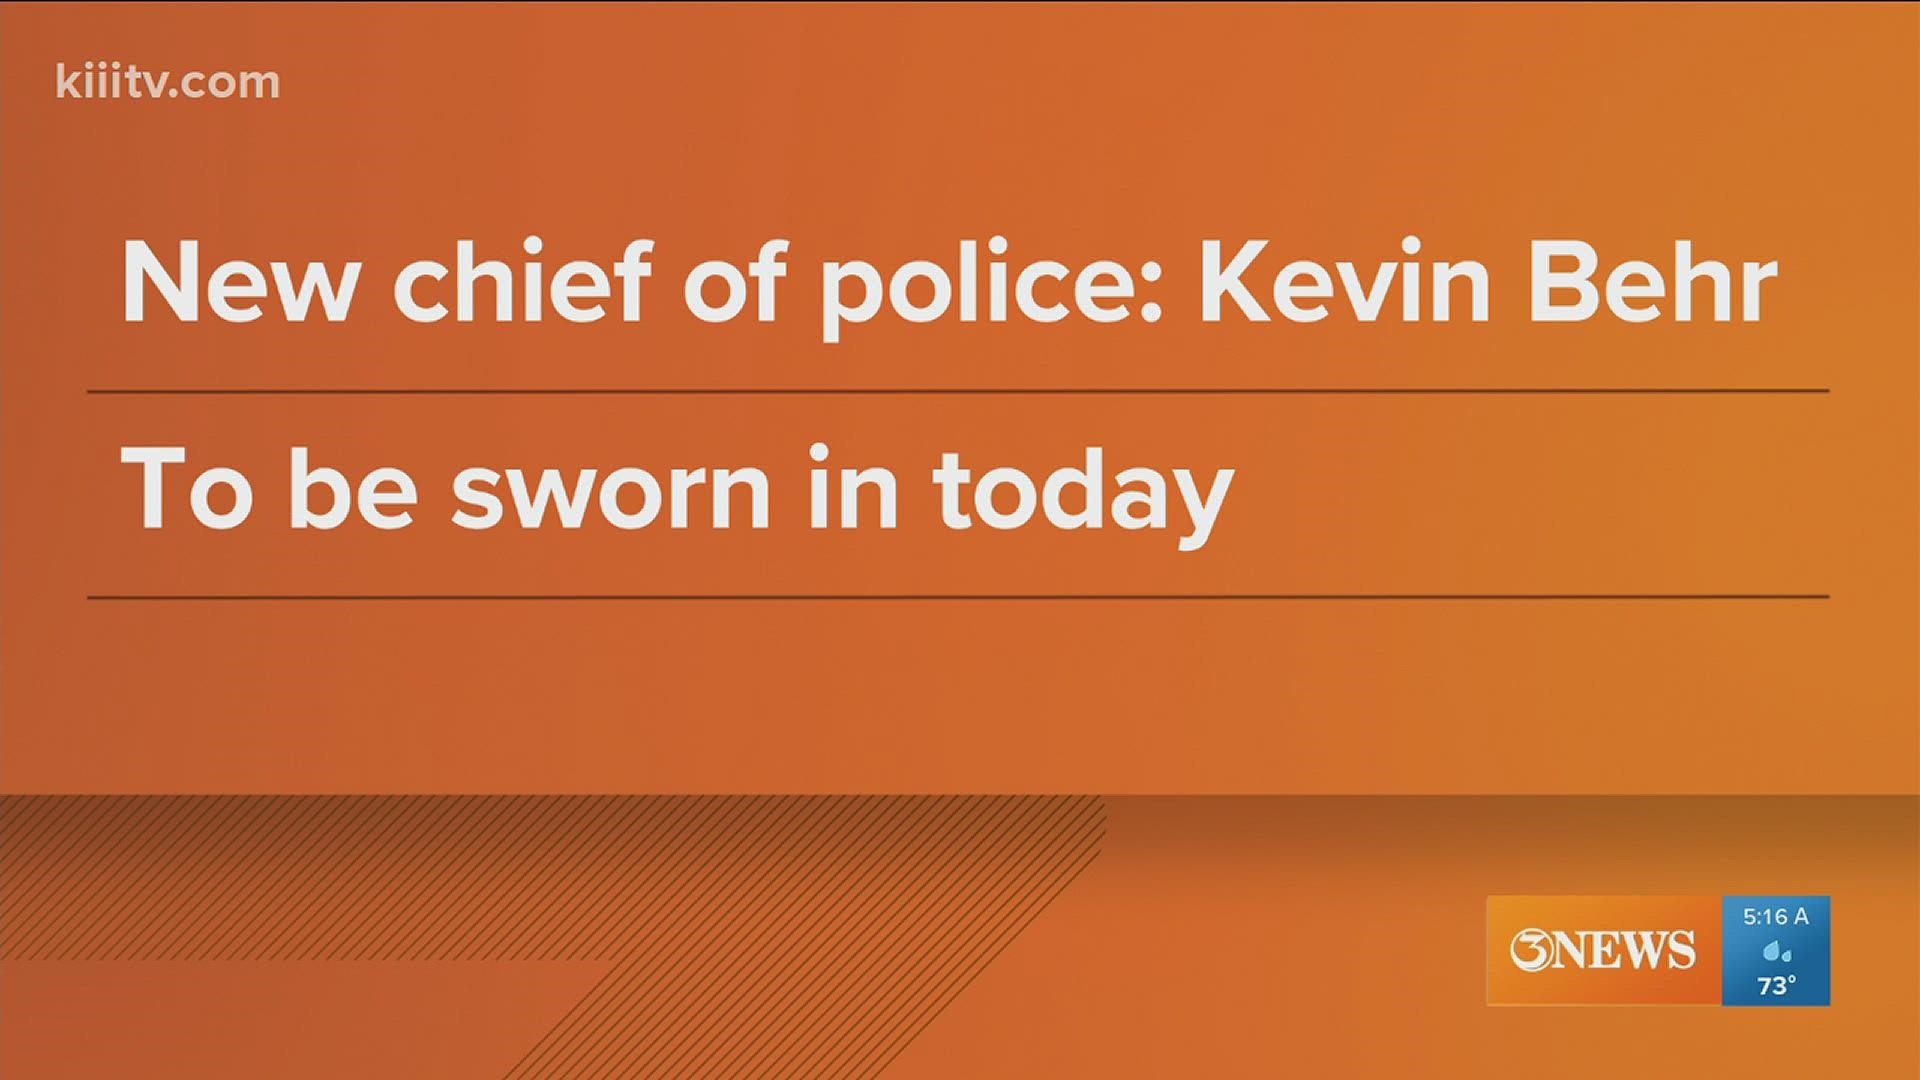 Kevin Behr will be sworn in as Beeville's 25th chief of police this Monday morning.